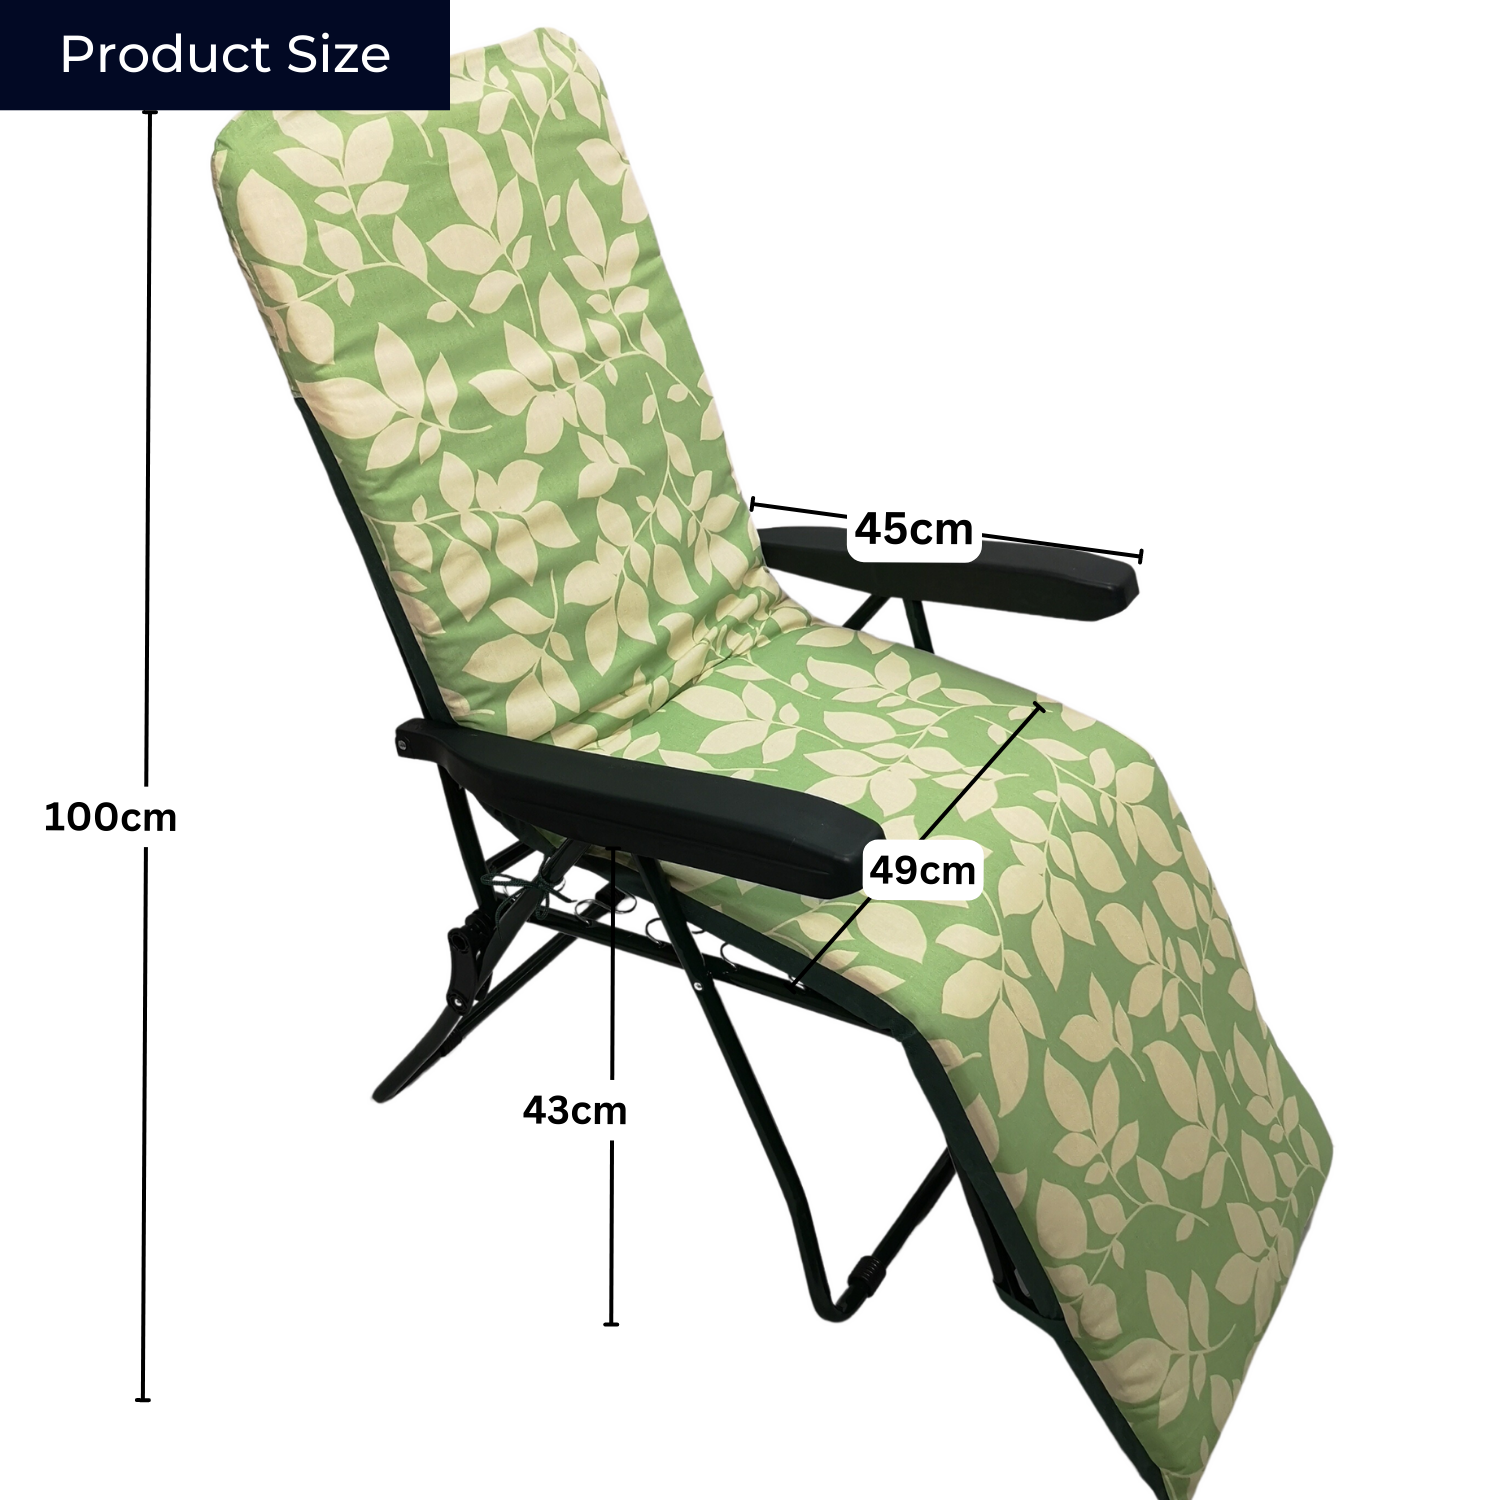 Padded Outdoor Garden Patio Recliner / Sun Lounger Green with Leaf Pattern